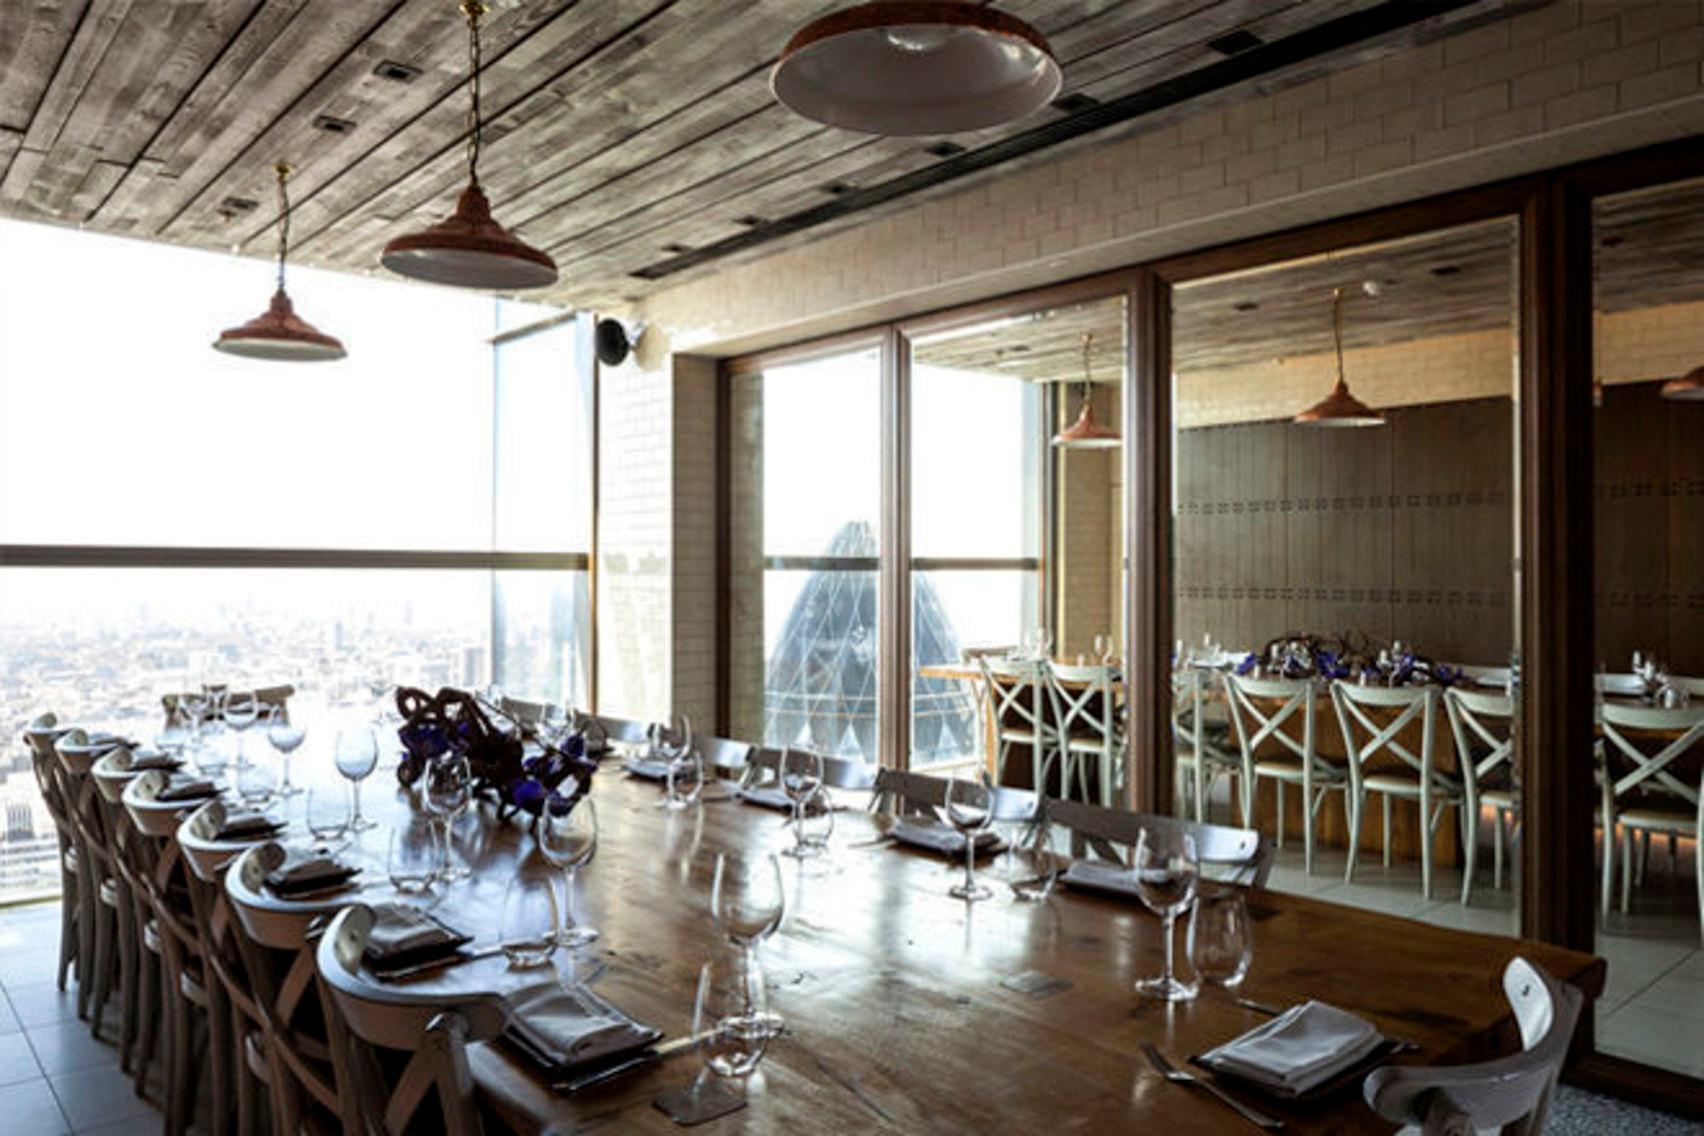 Private Dining Room - Brunch, Duck & Waffle photo #2